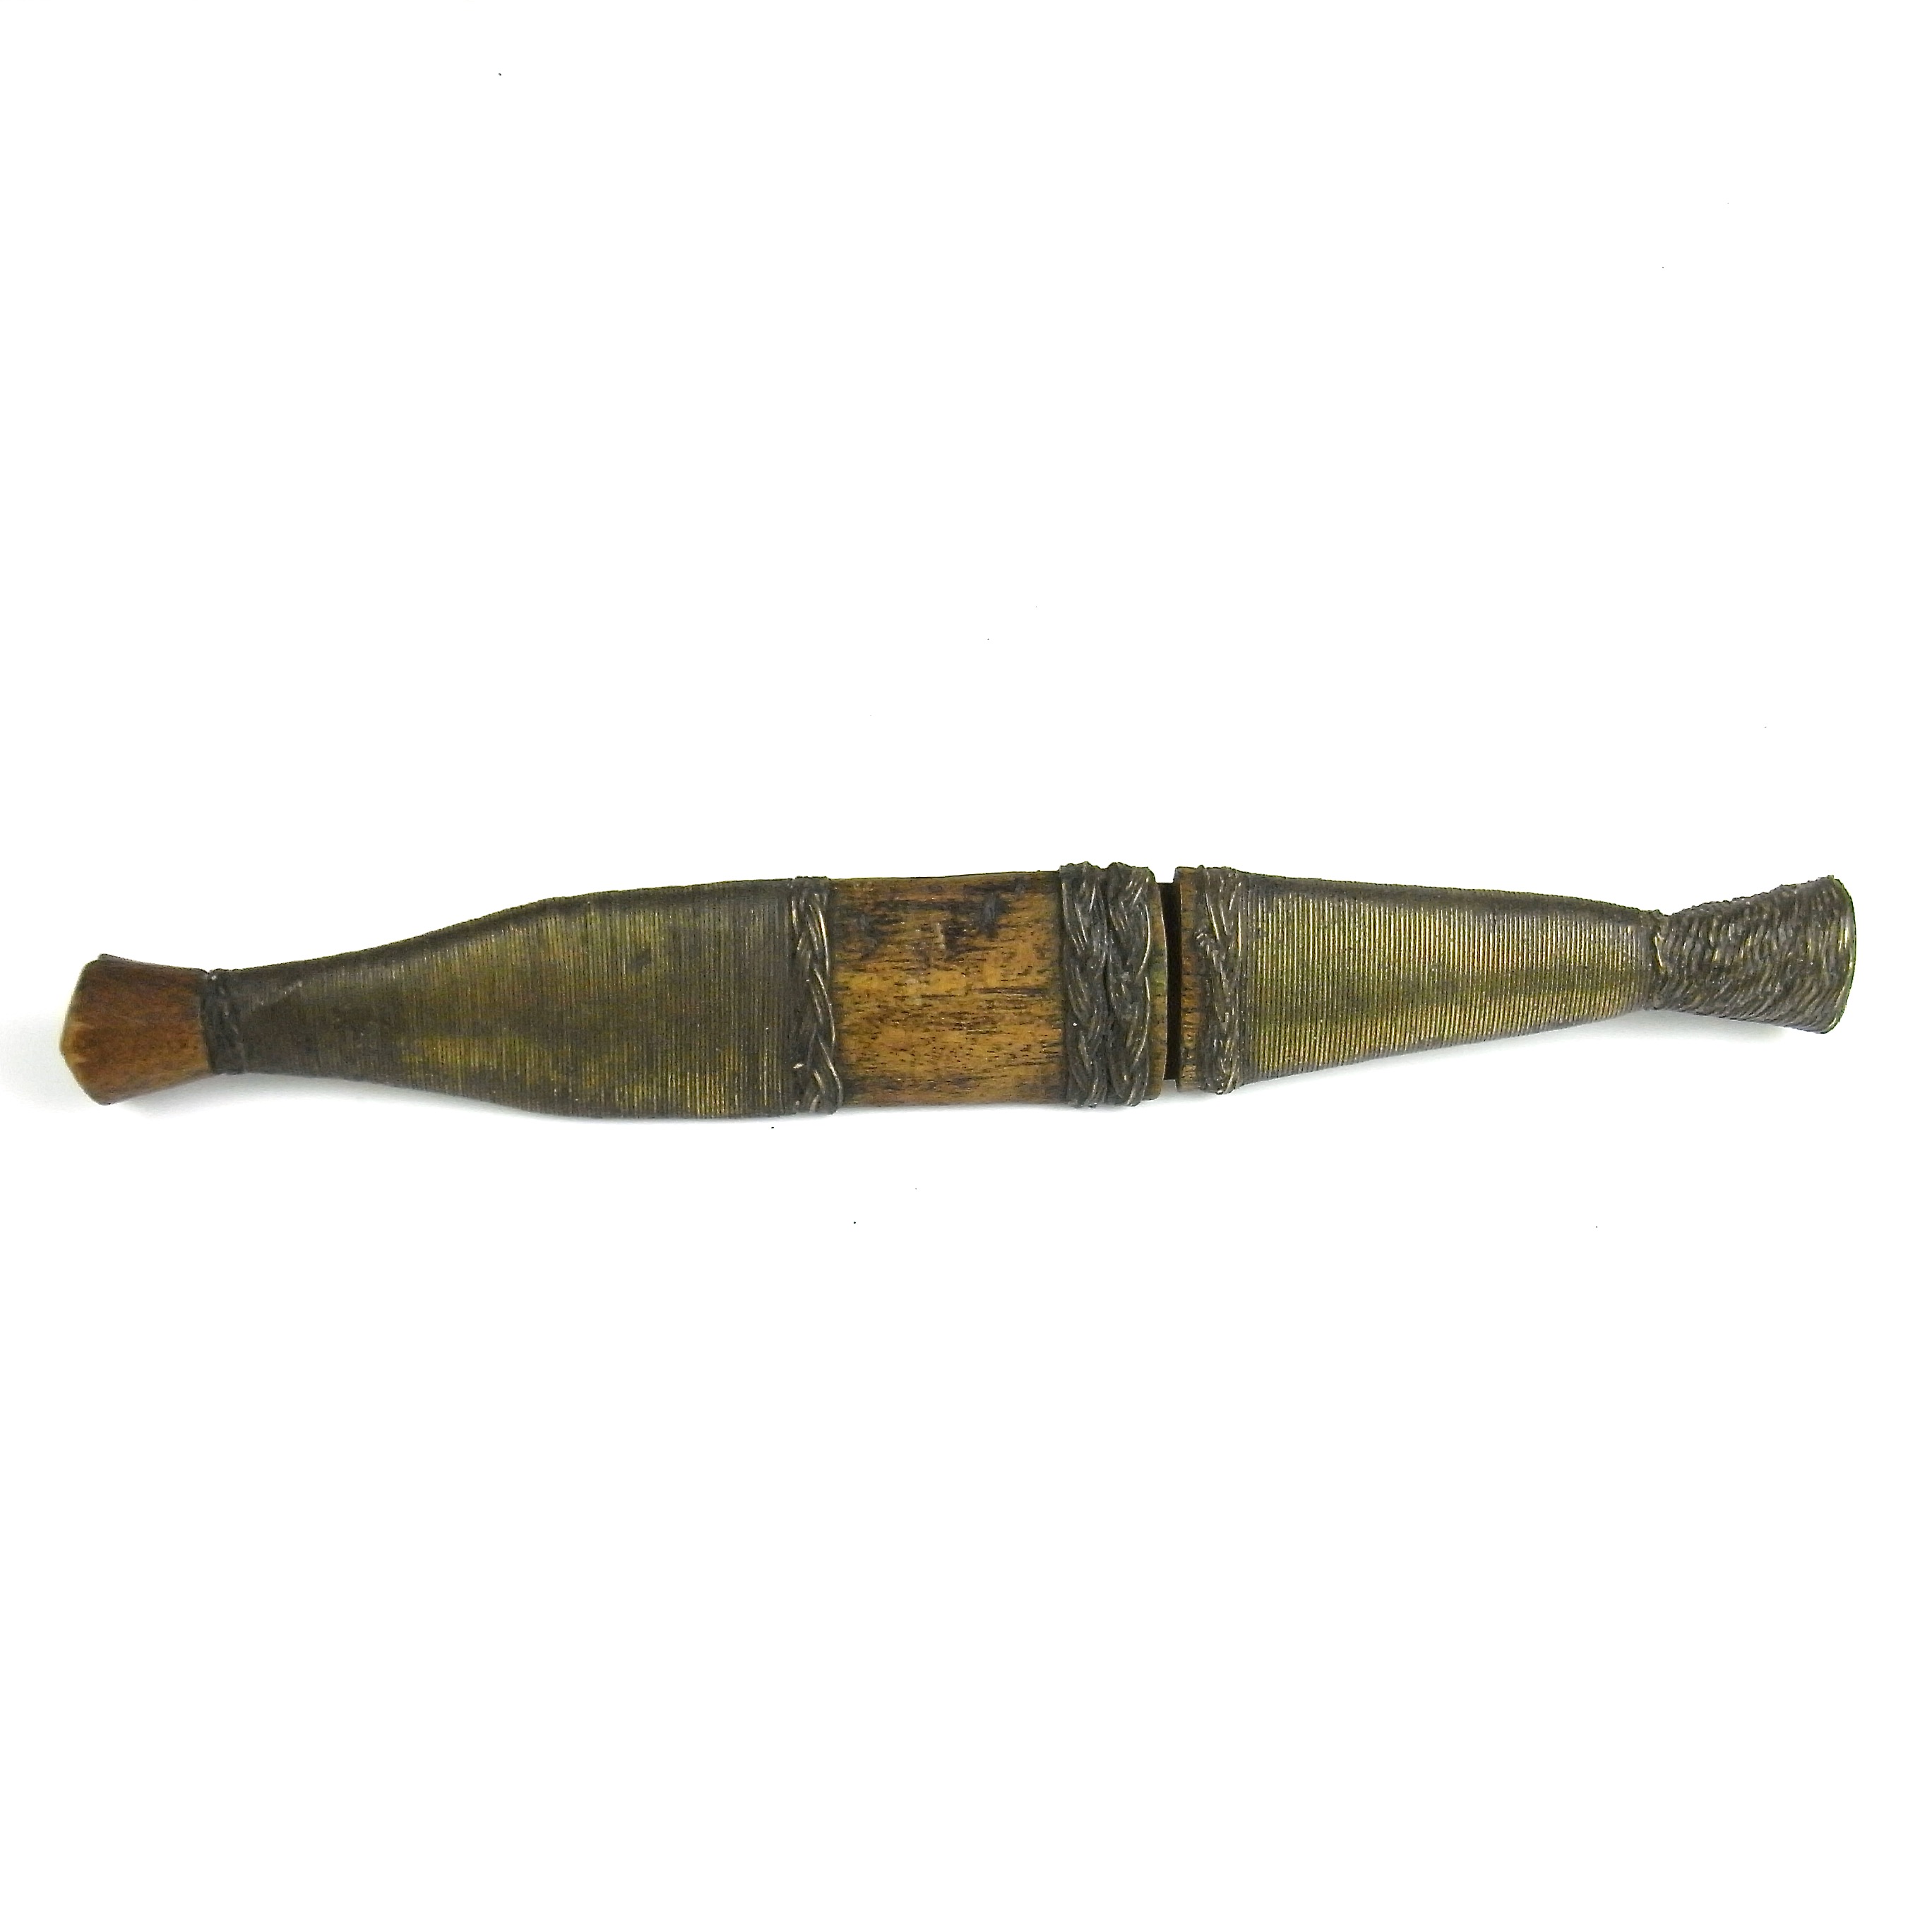 Tribal Art: An African Shona tribe knife with sheath, late 19th / early 20th century. - Image 2 of 2